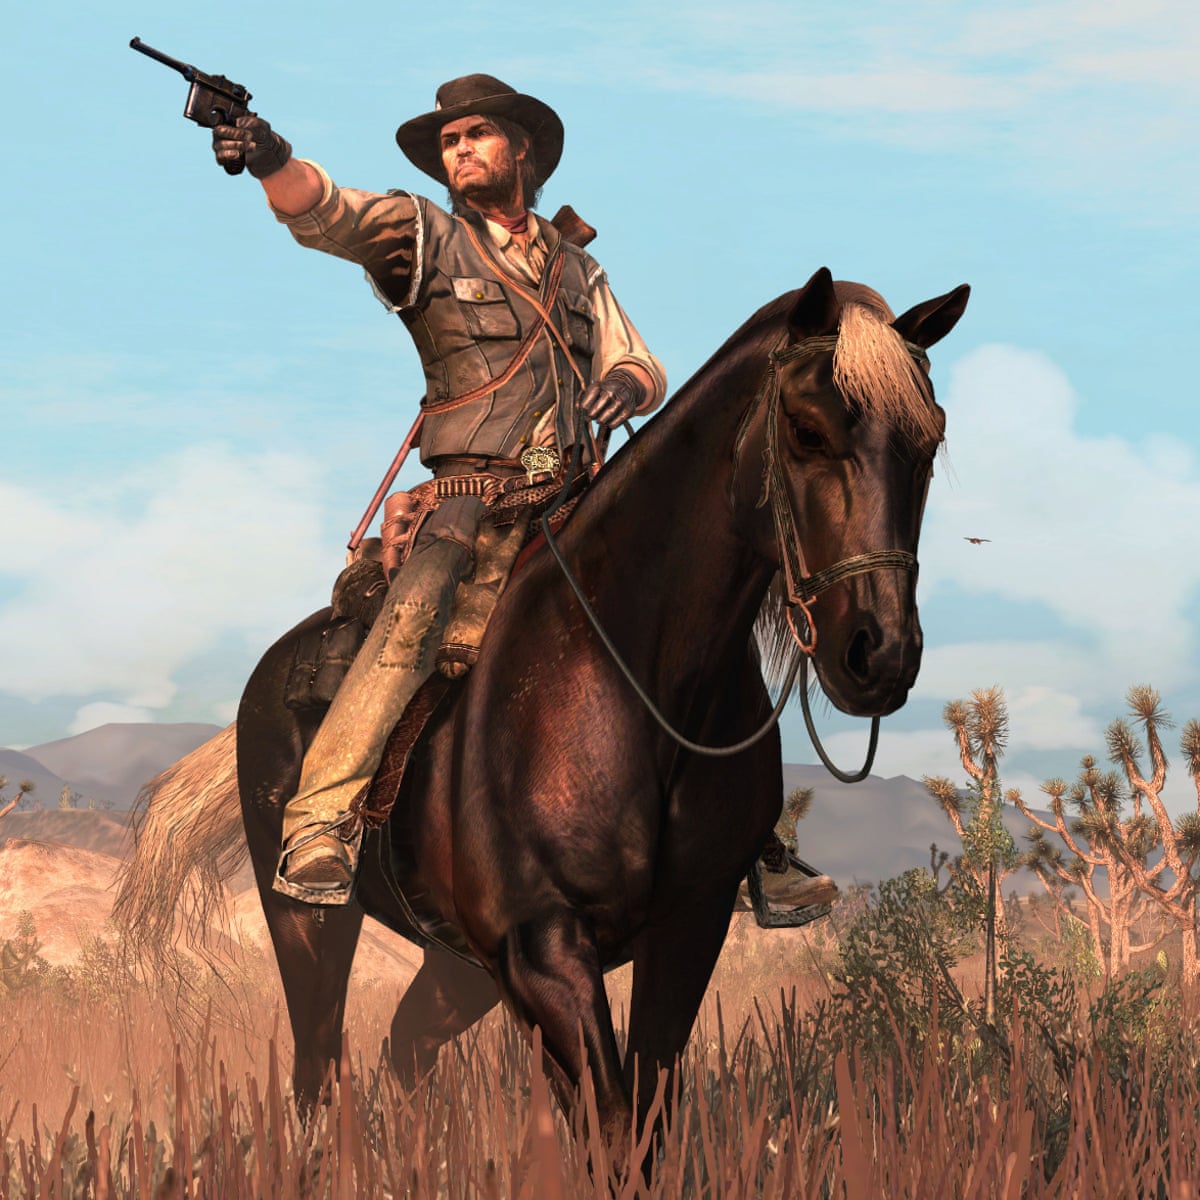 Why Red Dead Redemption's return could be another rerelease gone wrong, Games